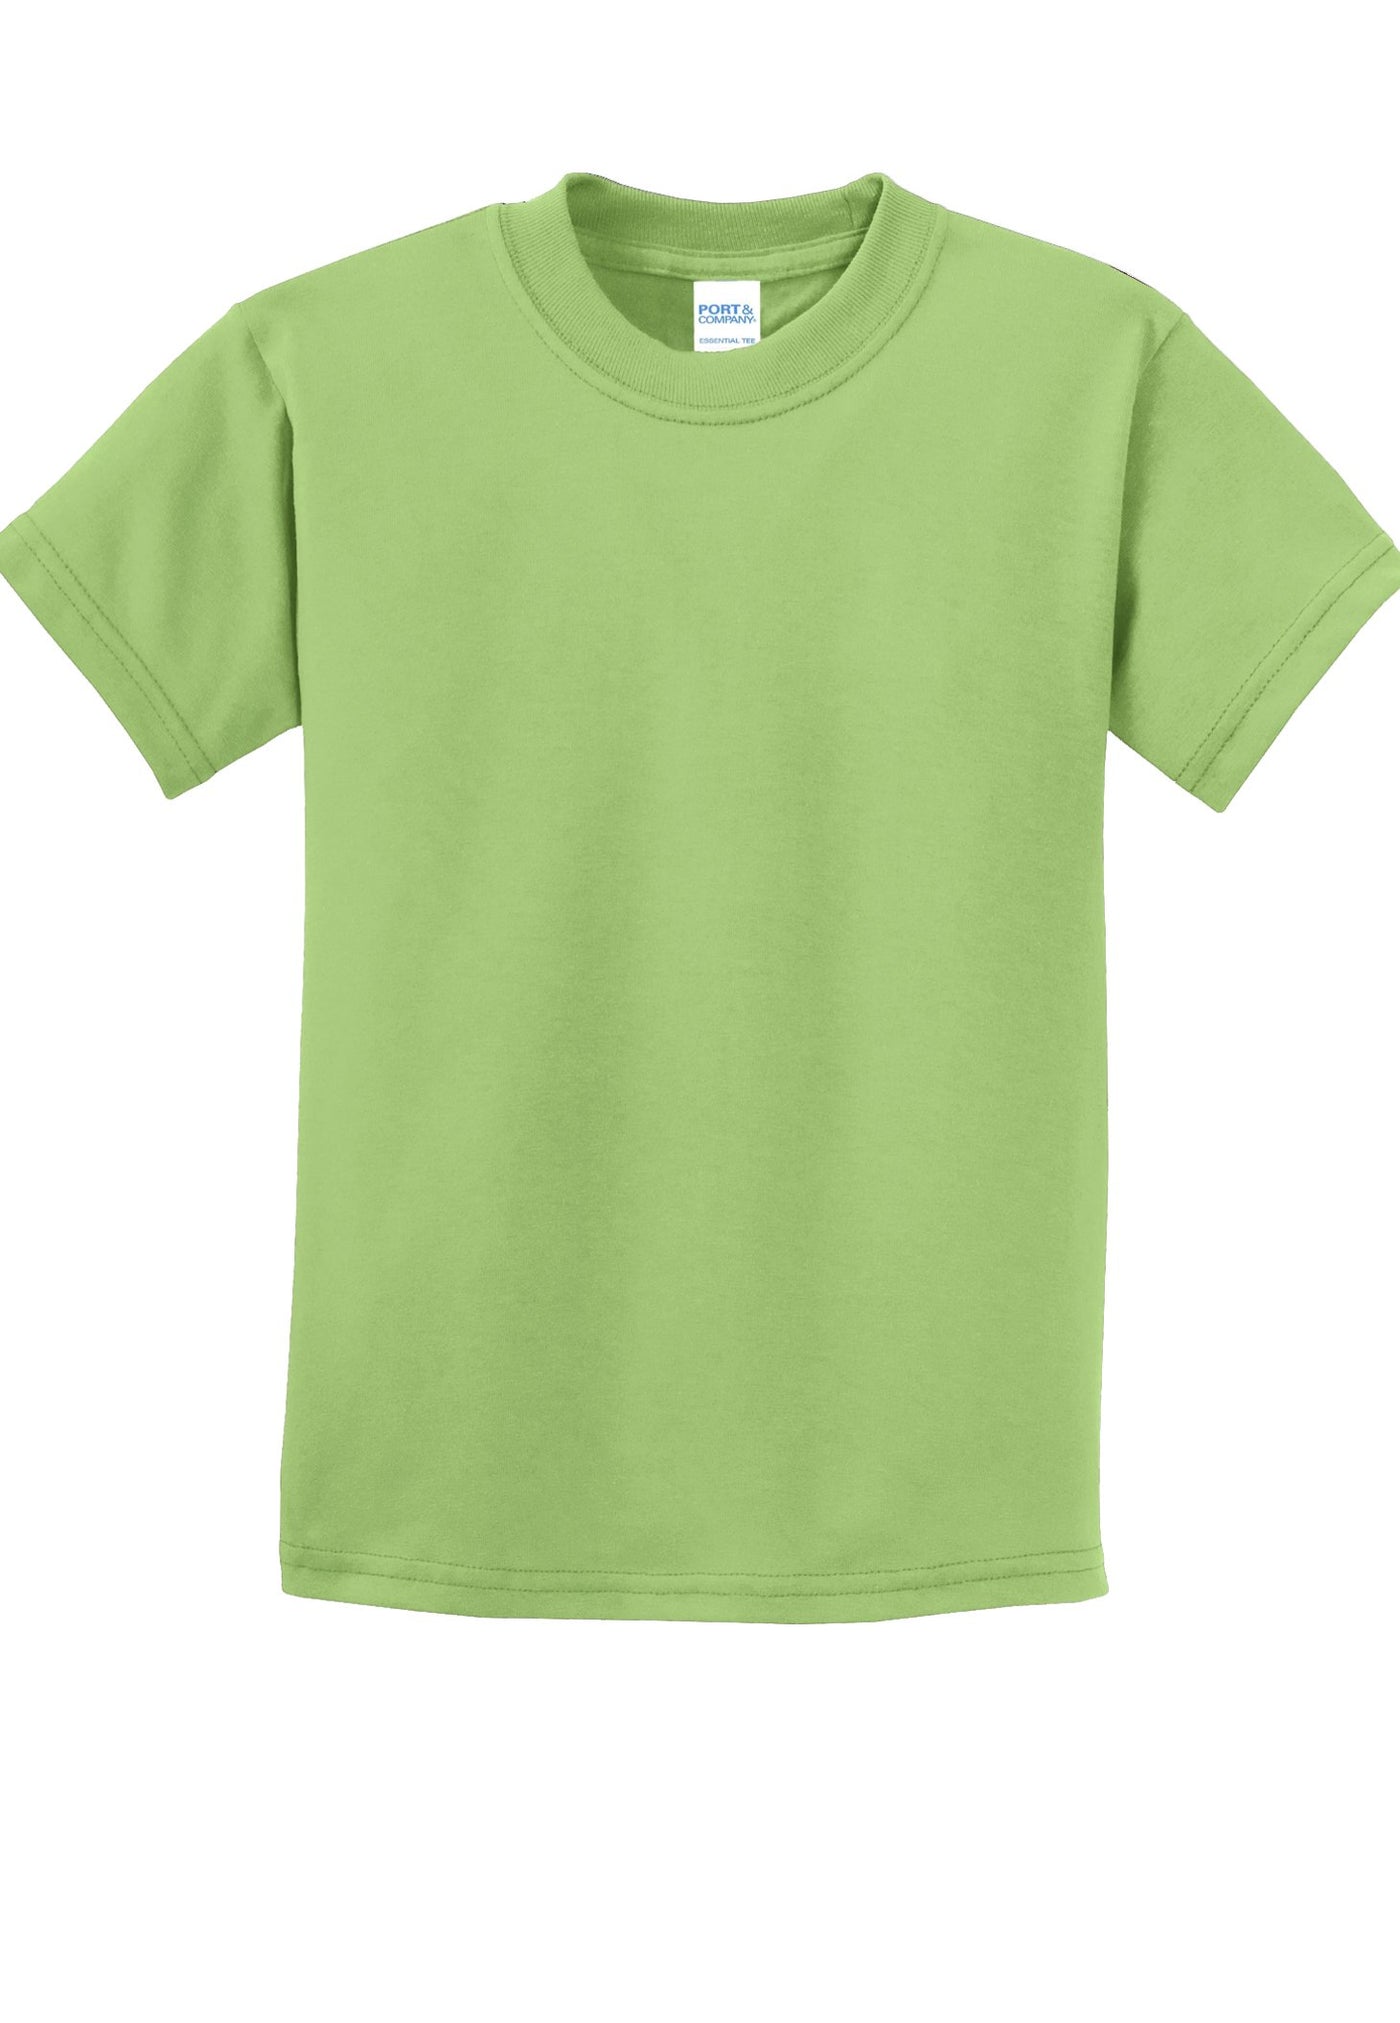 Port & Company® Youth Essential Tee - New Colors